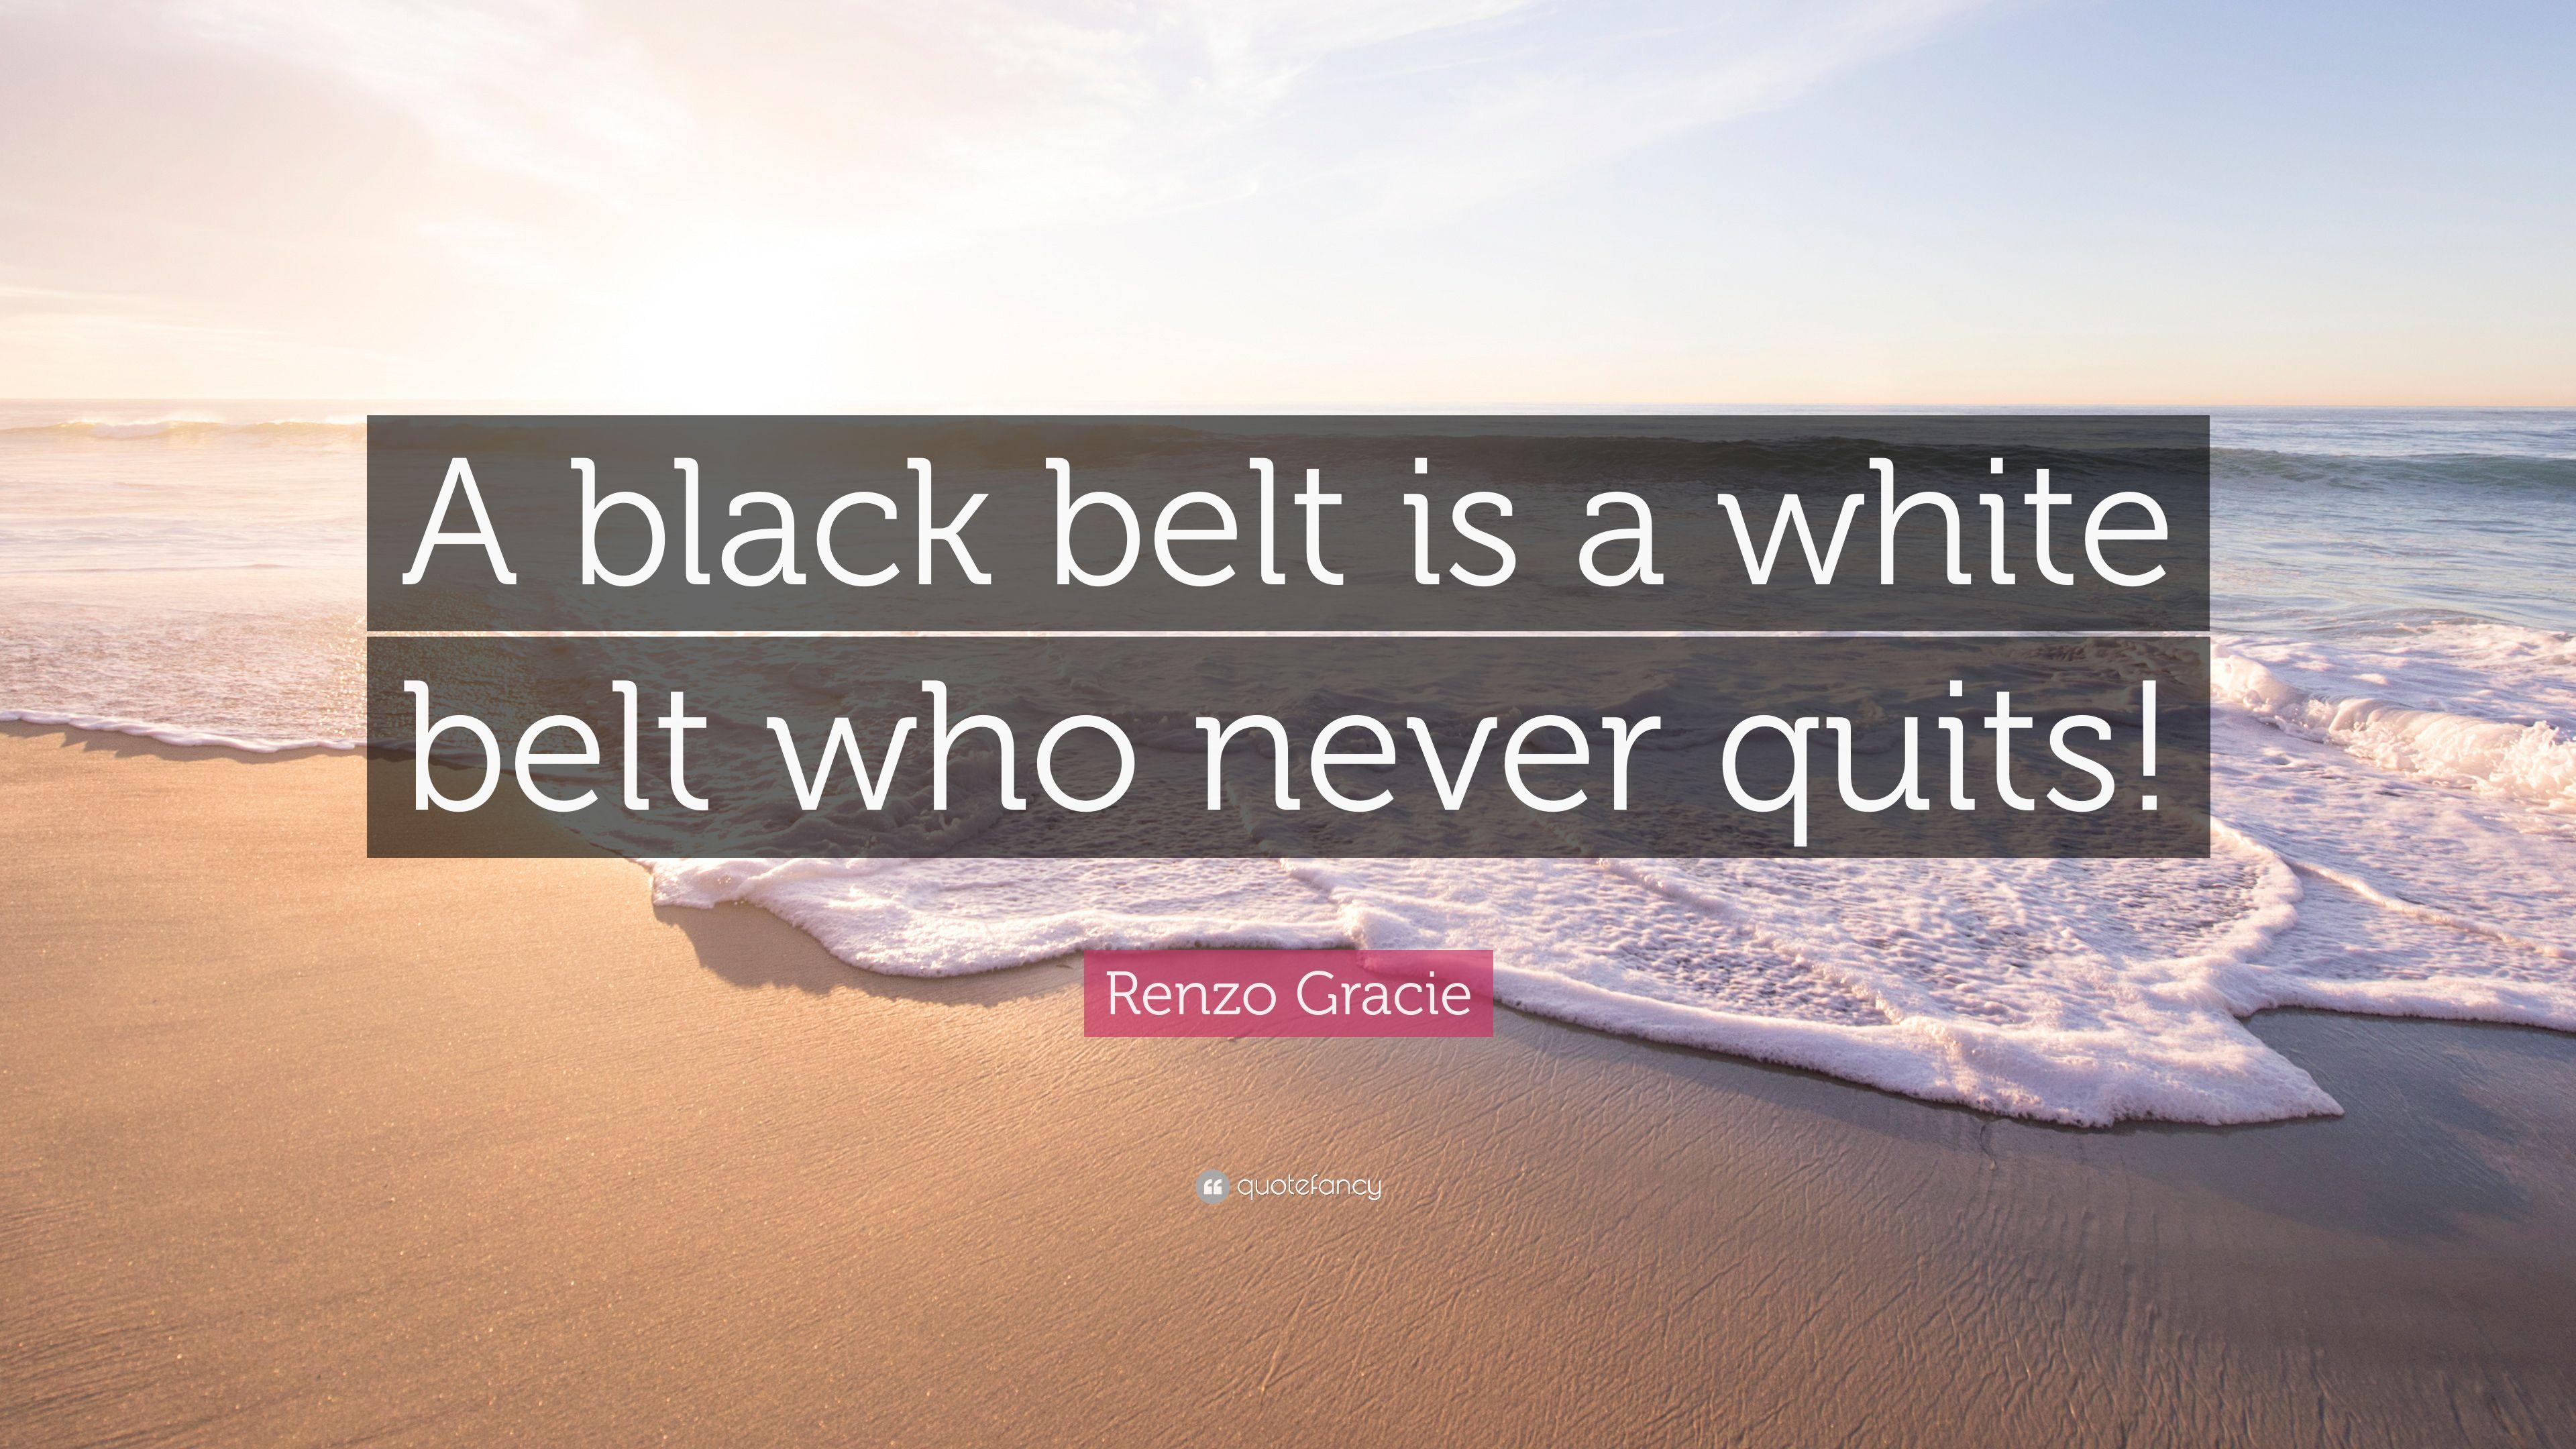 Renzo Gracie Quote: “A black belt is a white belt who never quits